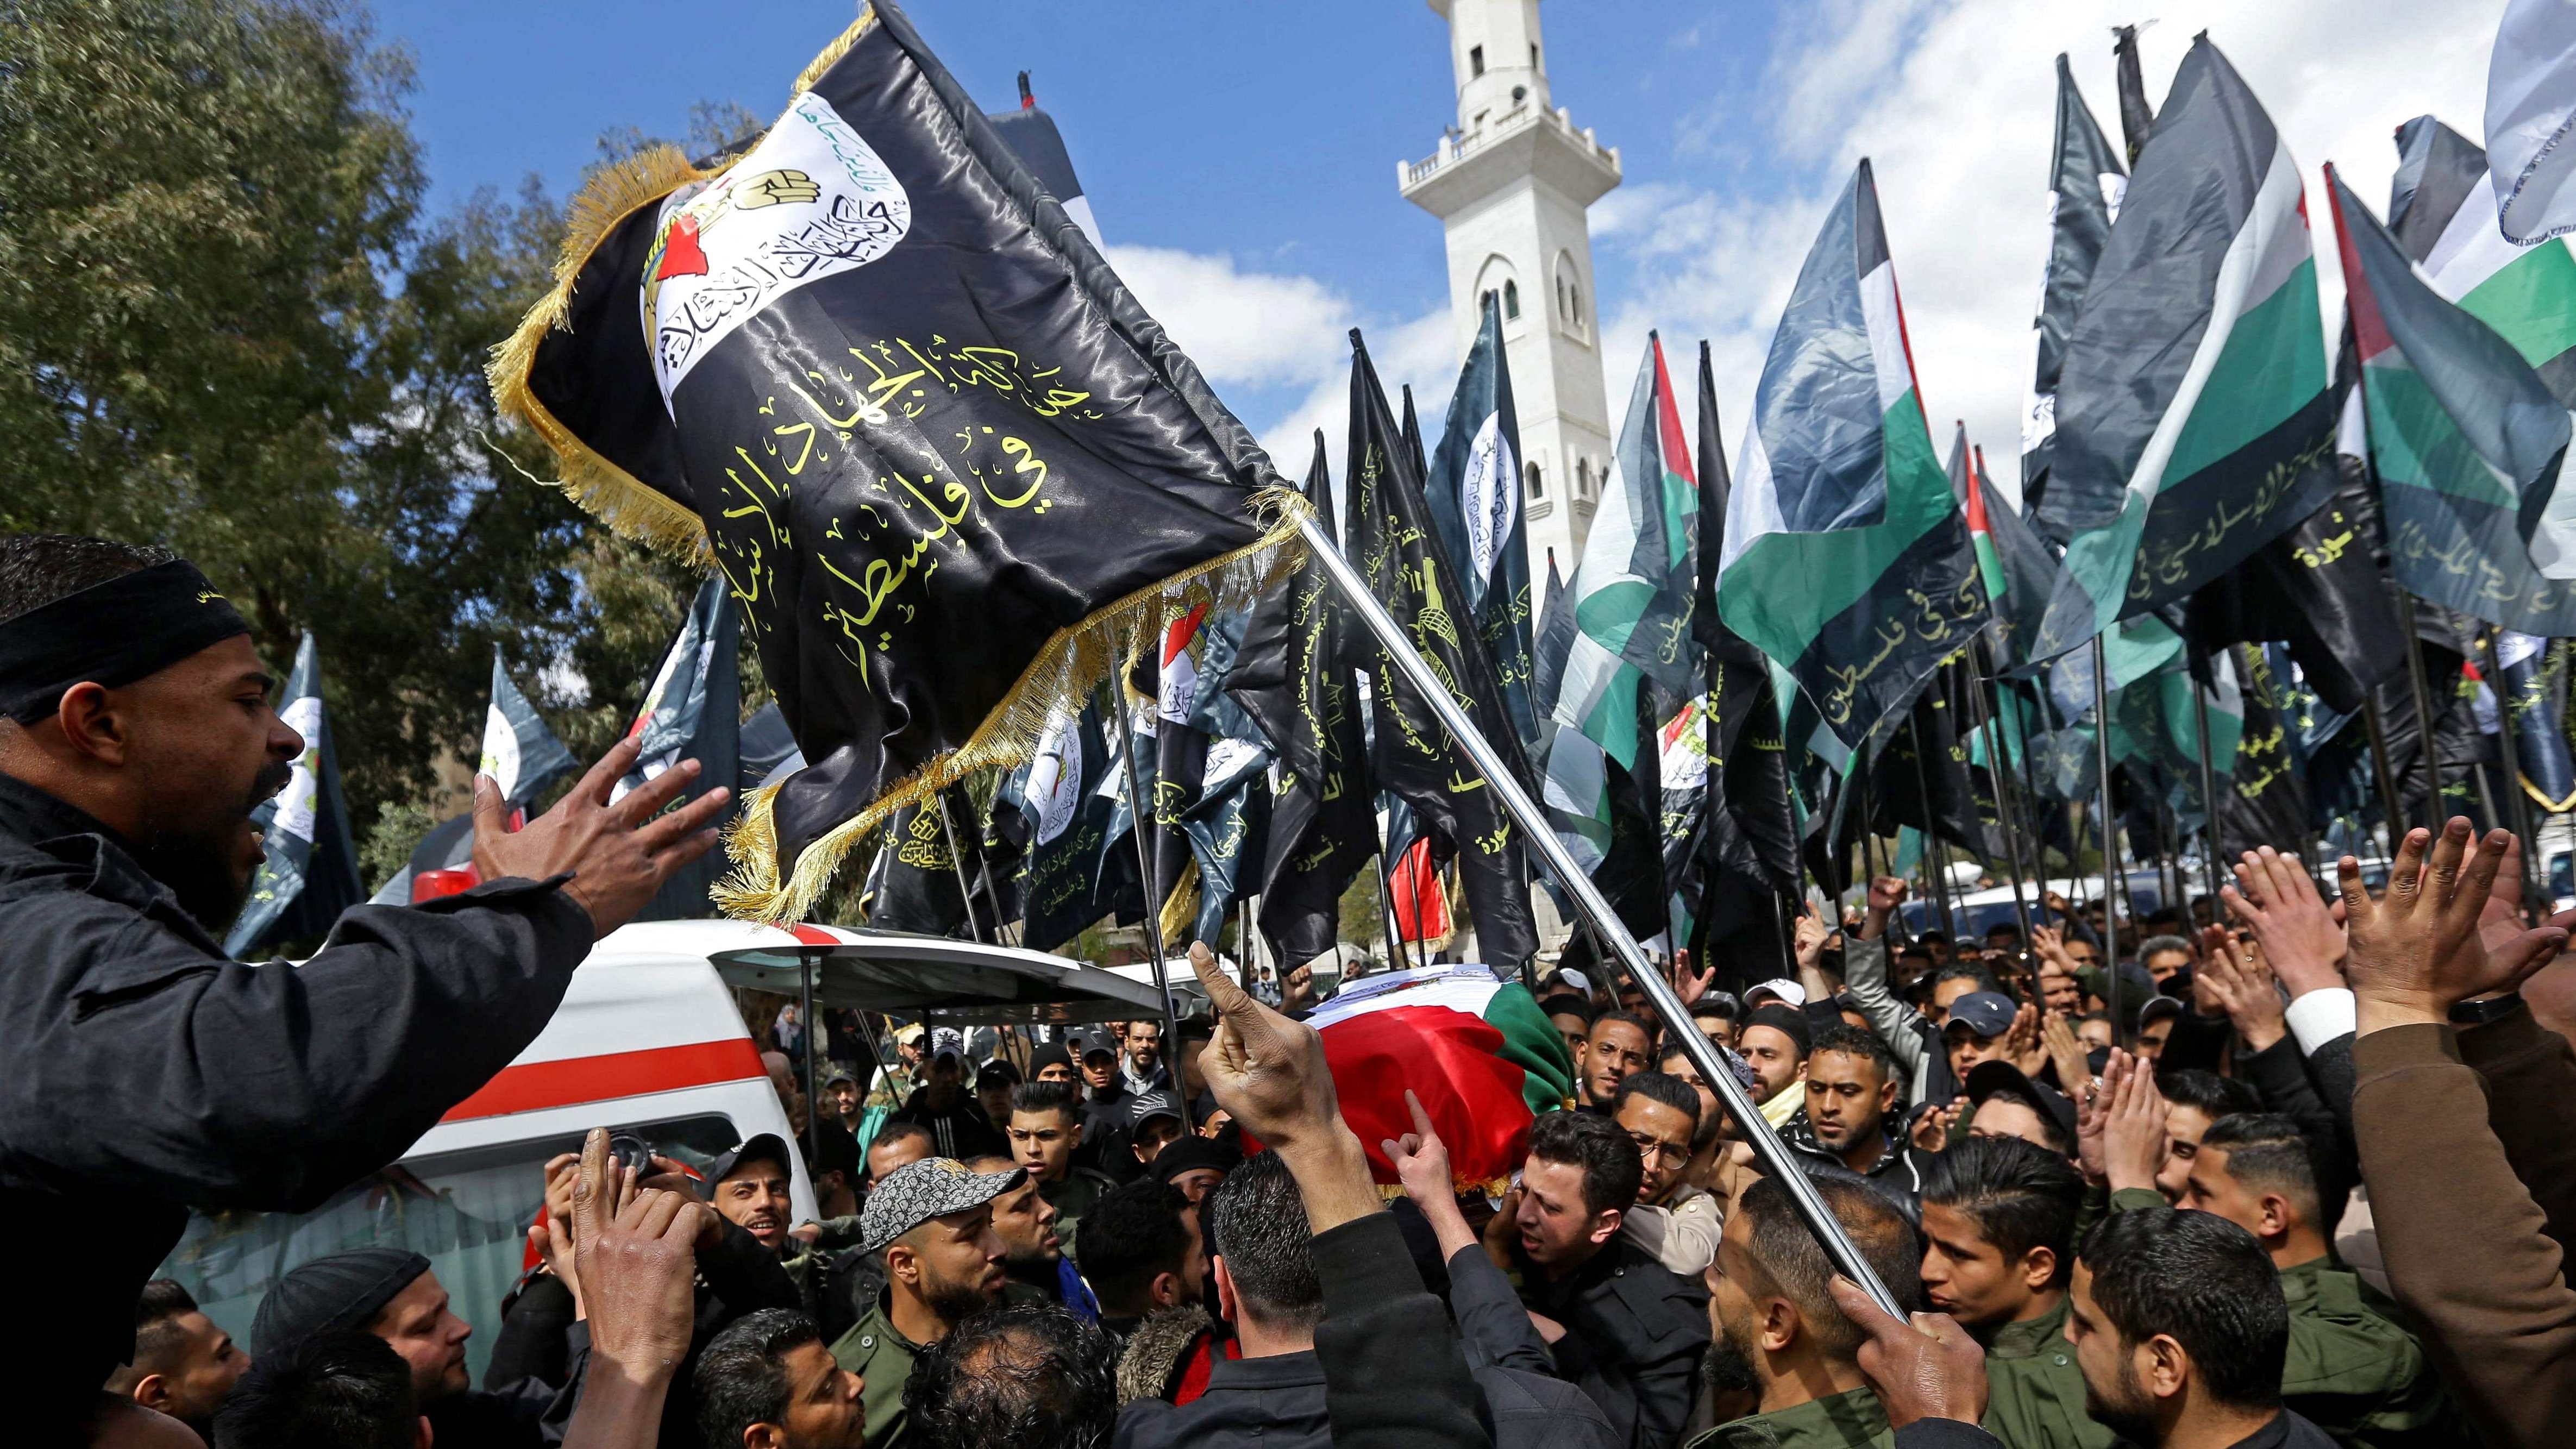 Mourners carry the coffin of Ali Ramzi al-Aswad, one of the commanders of Palestinian militant group Islamic Jihad, during his funeral in the countryside of Damascus on March 20, 2023. - Palestinian militant group Islamic Jihad said one of its commanders had been shot dead in Syria in an assassination it blamed on Israeli agents. Credit: AFP Photo